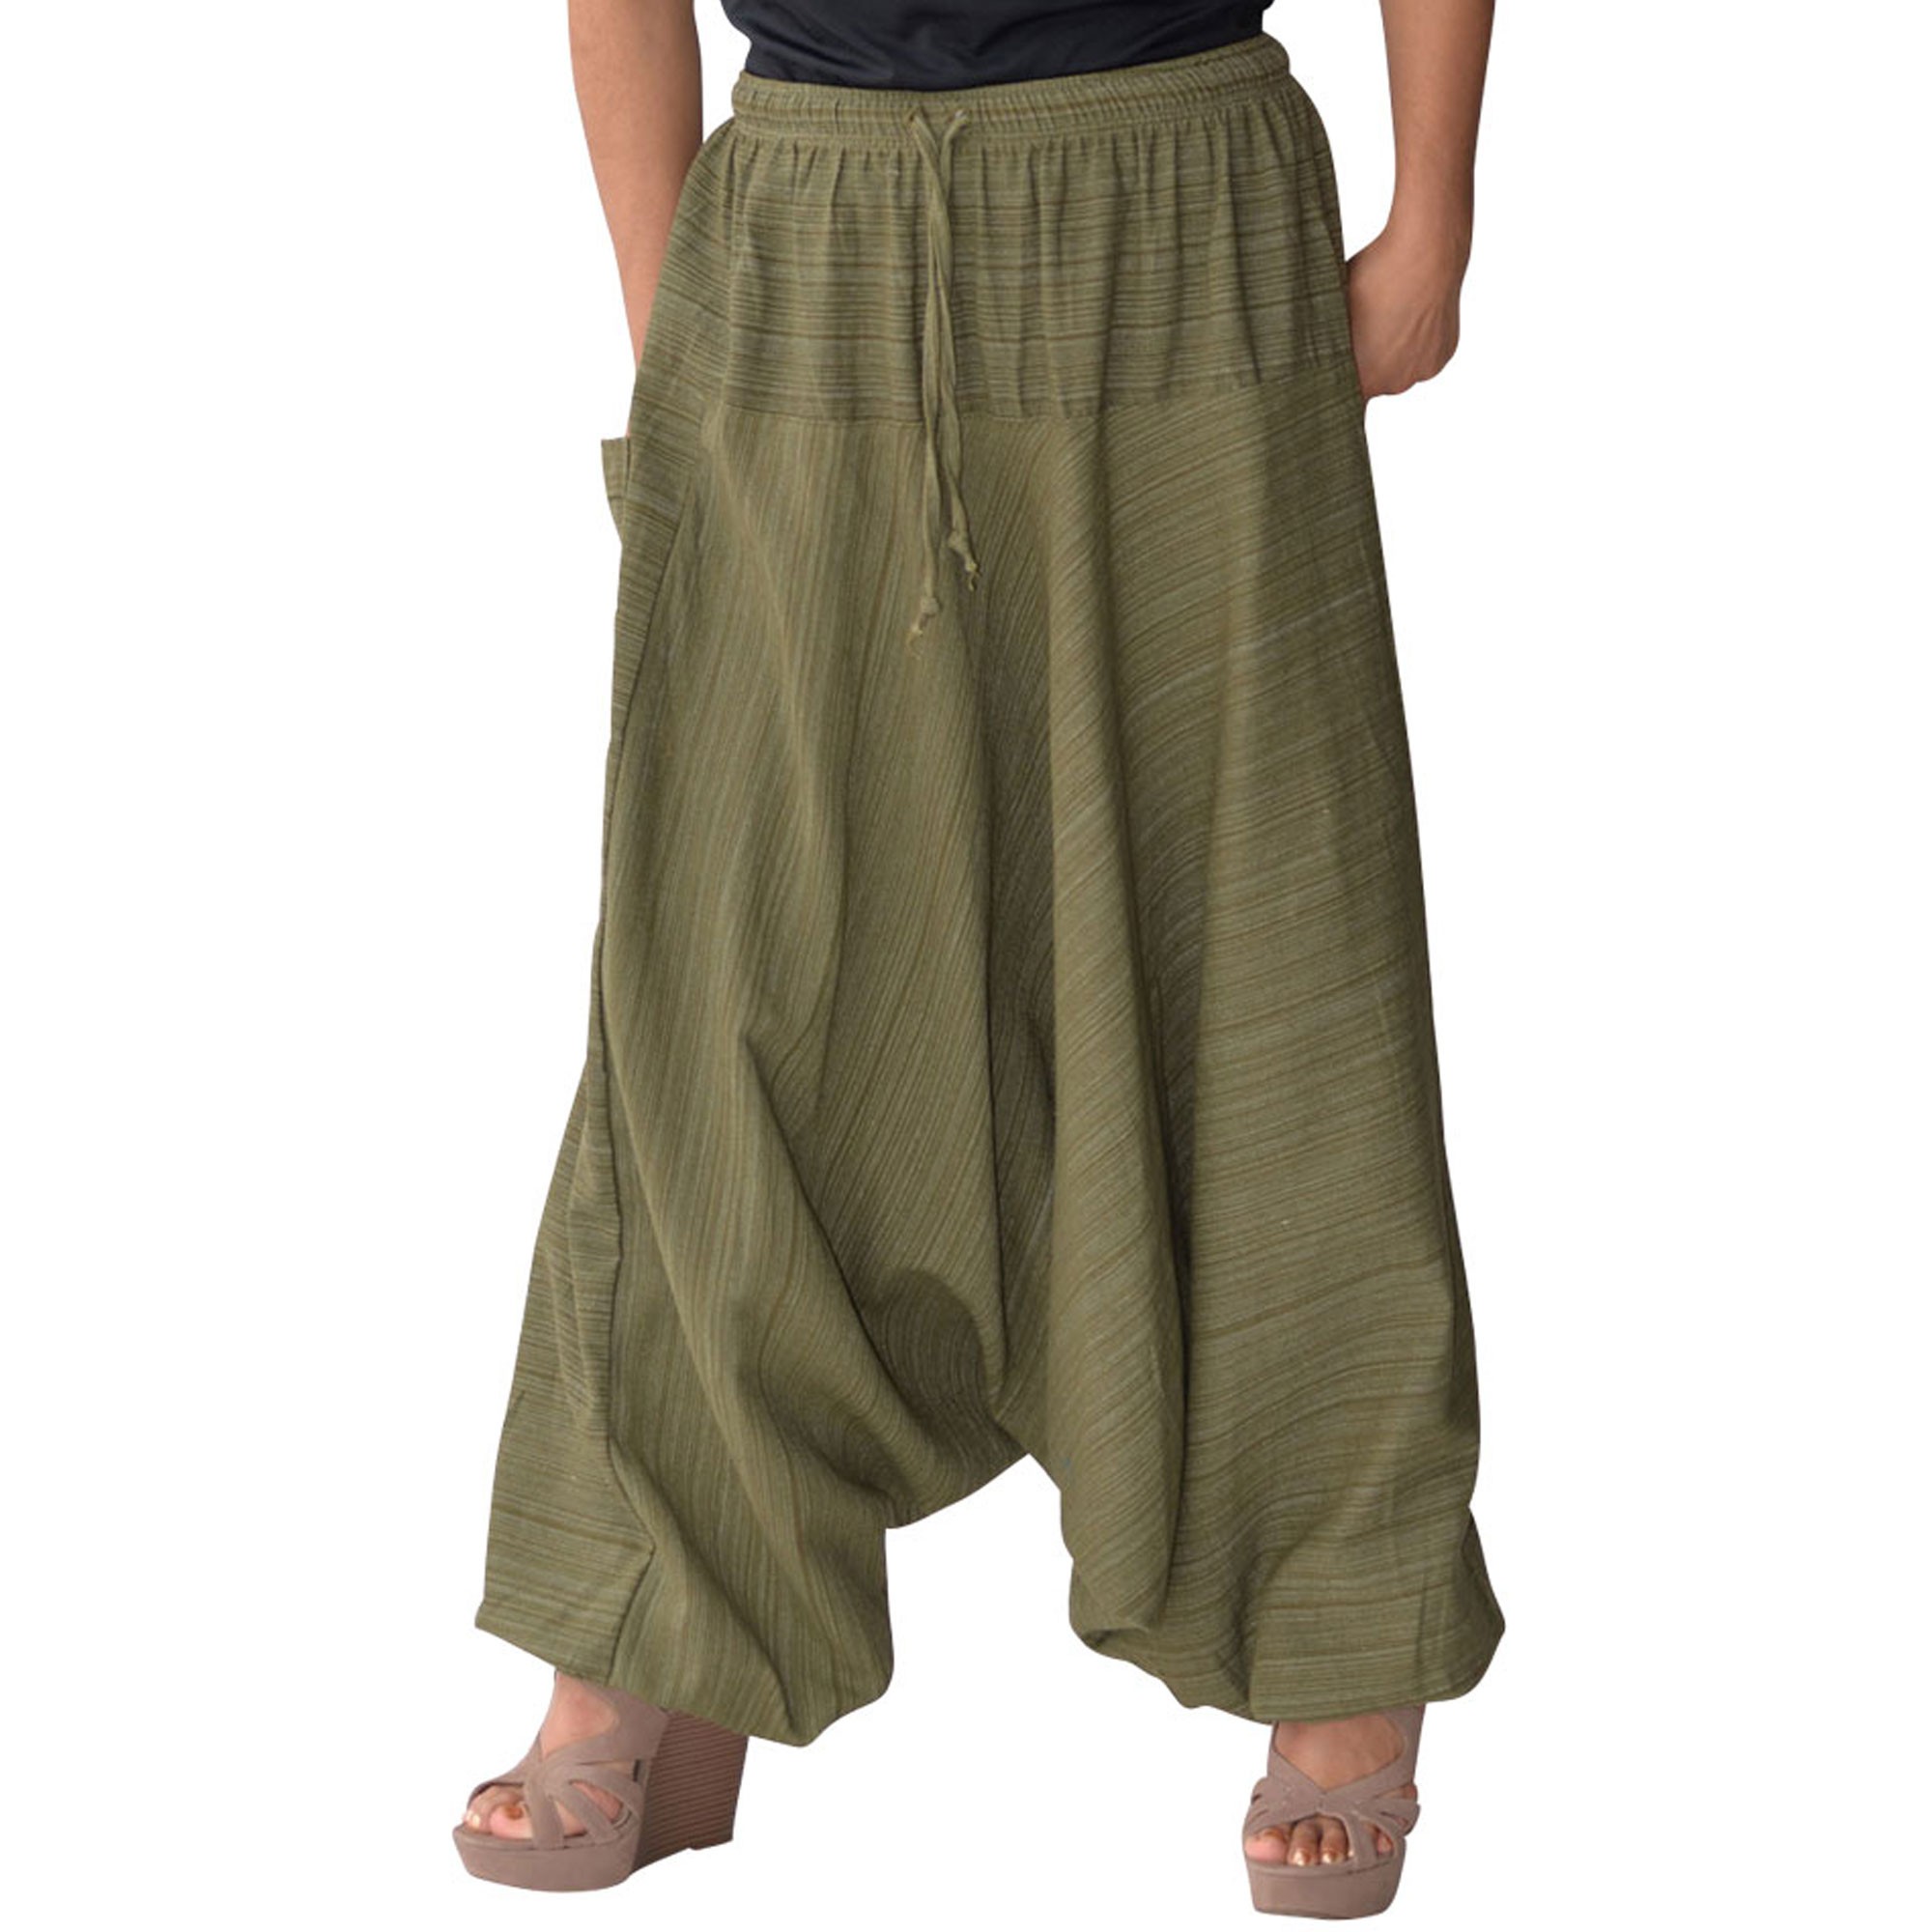 GREEN HAREM PANTS--ONE SIZE FITS MOST